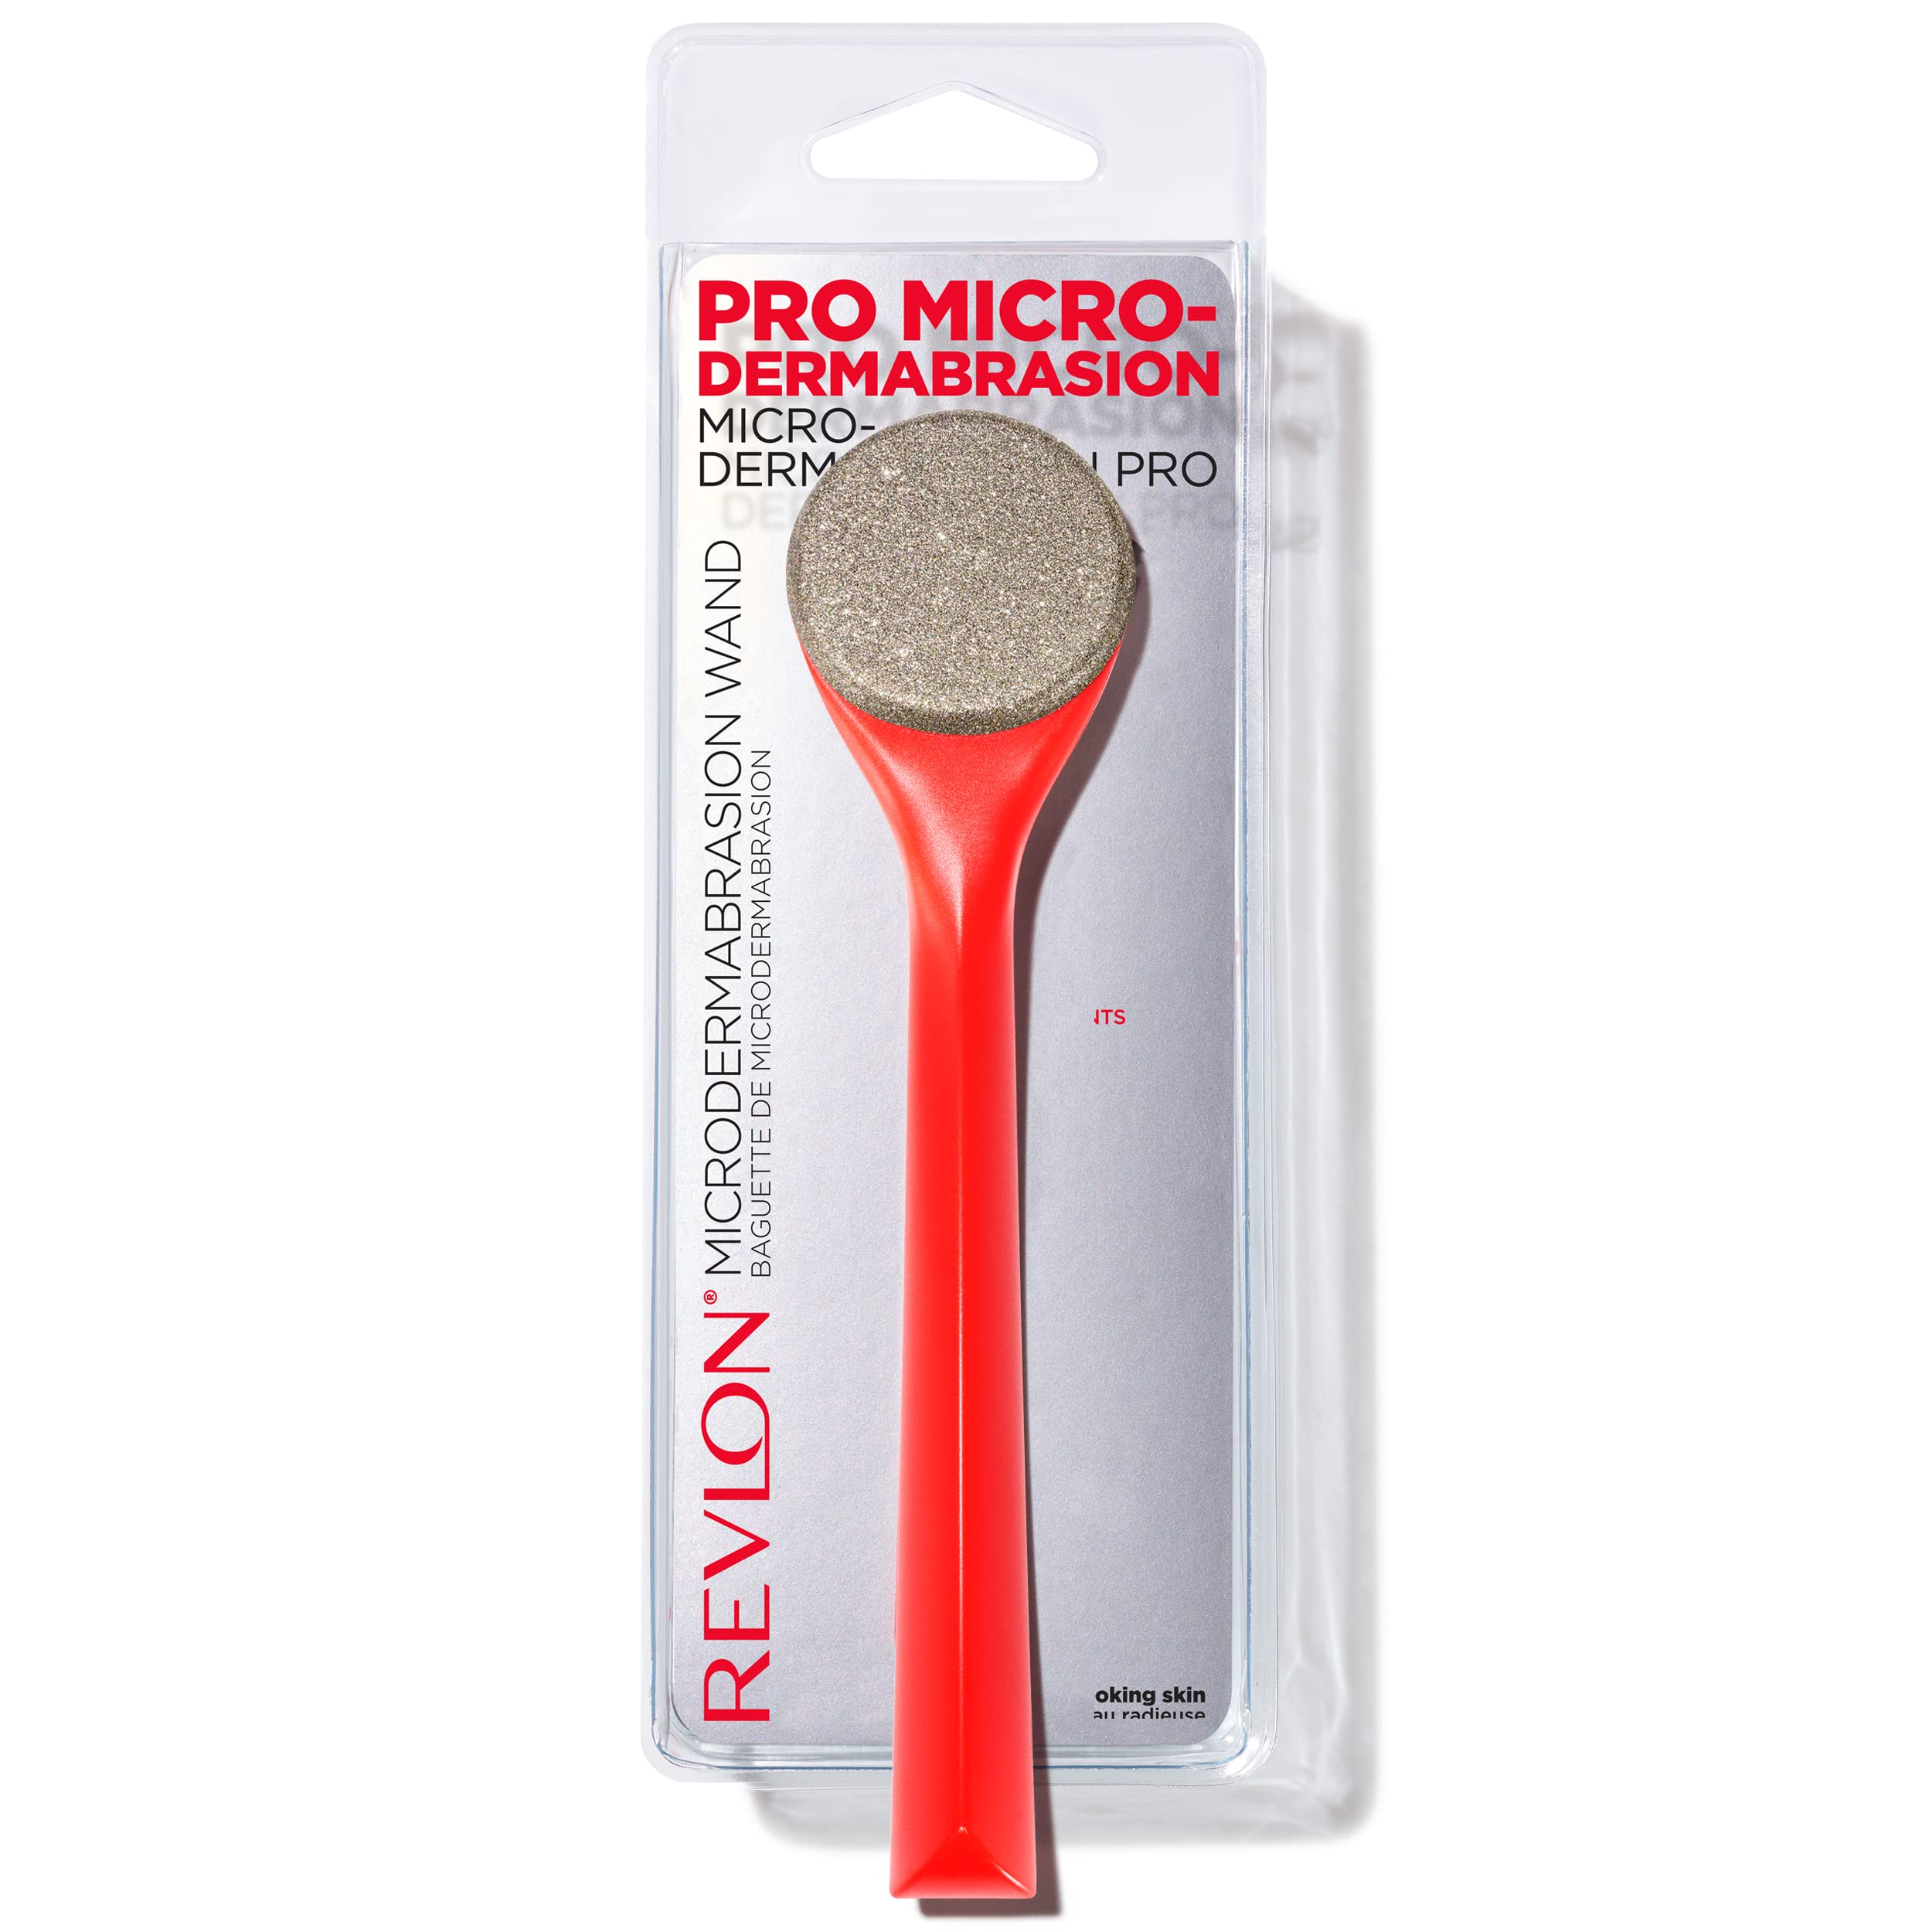 7.5" Revlon Portable Microdermabrasion Wand w/ Real Diamond Grit $8.40 w/ S&S + Free Shipping w/ Prime or on $35+